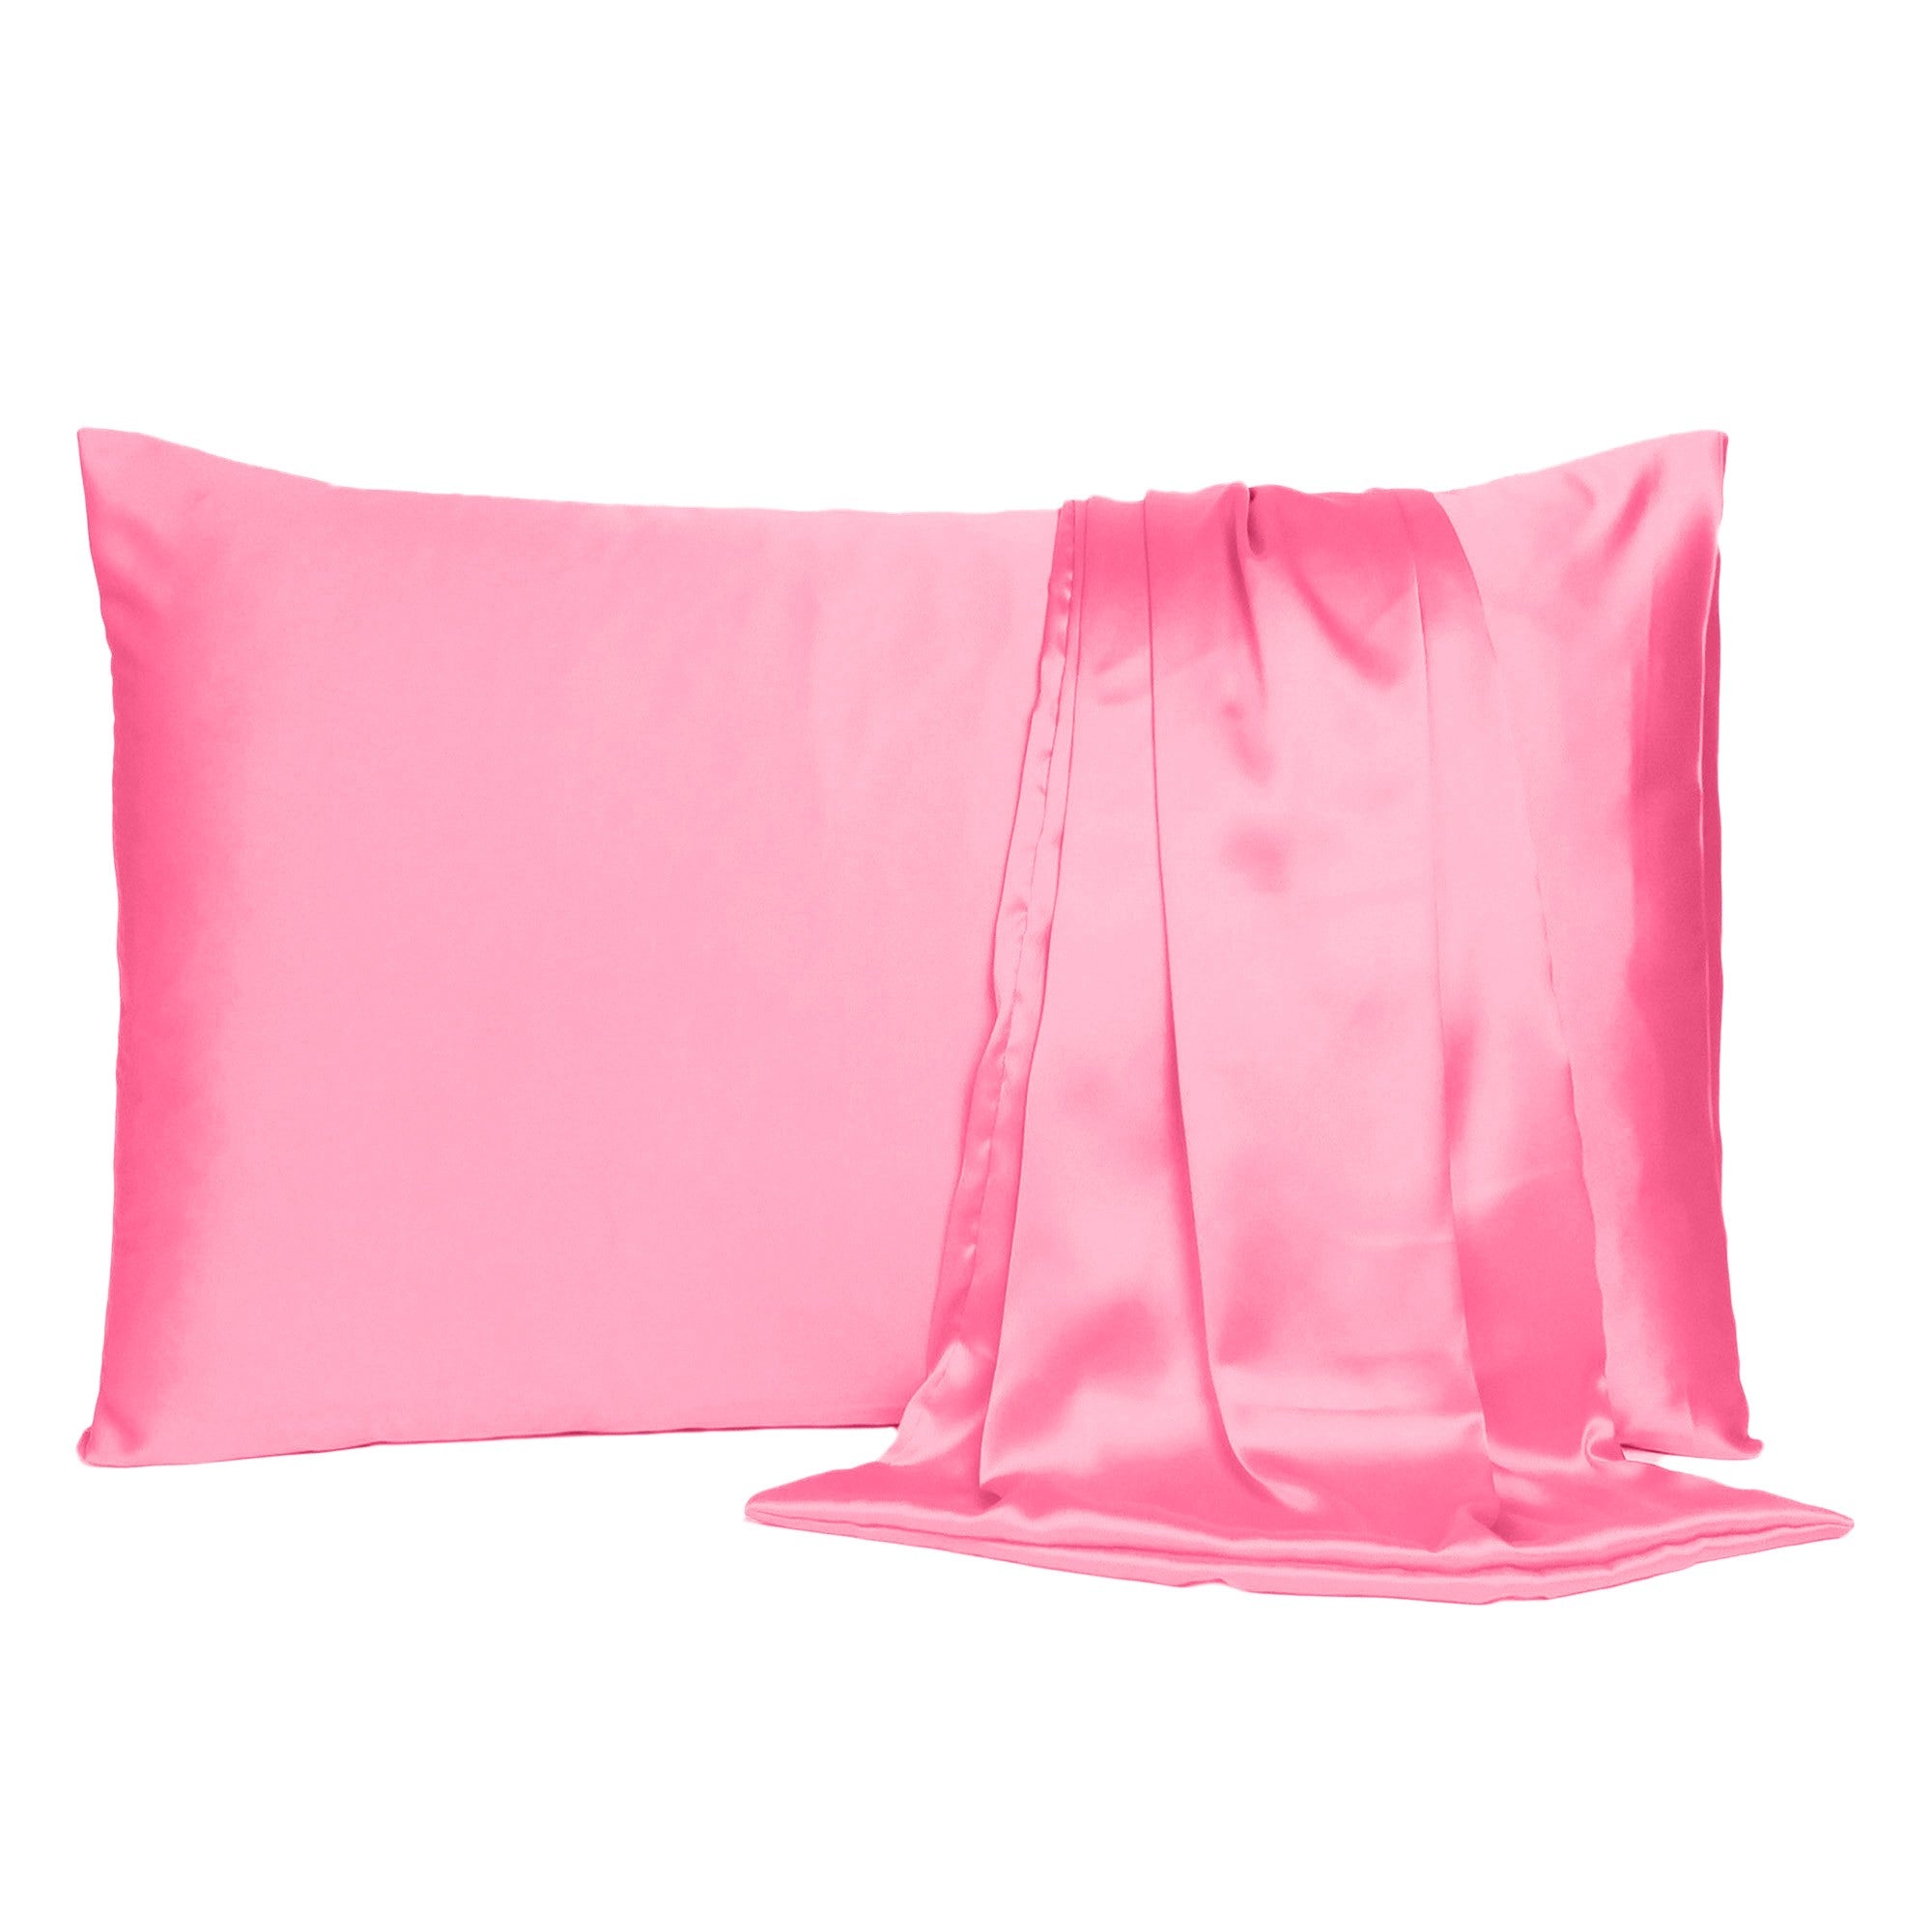 Pink Rose Dreamy Set Of 2 Silky Satin King Pillowcases